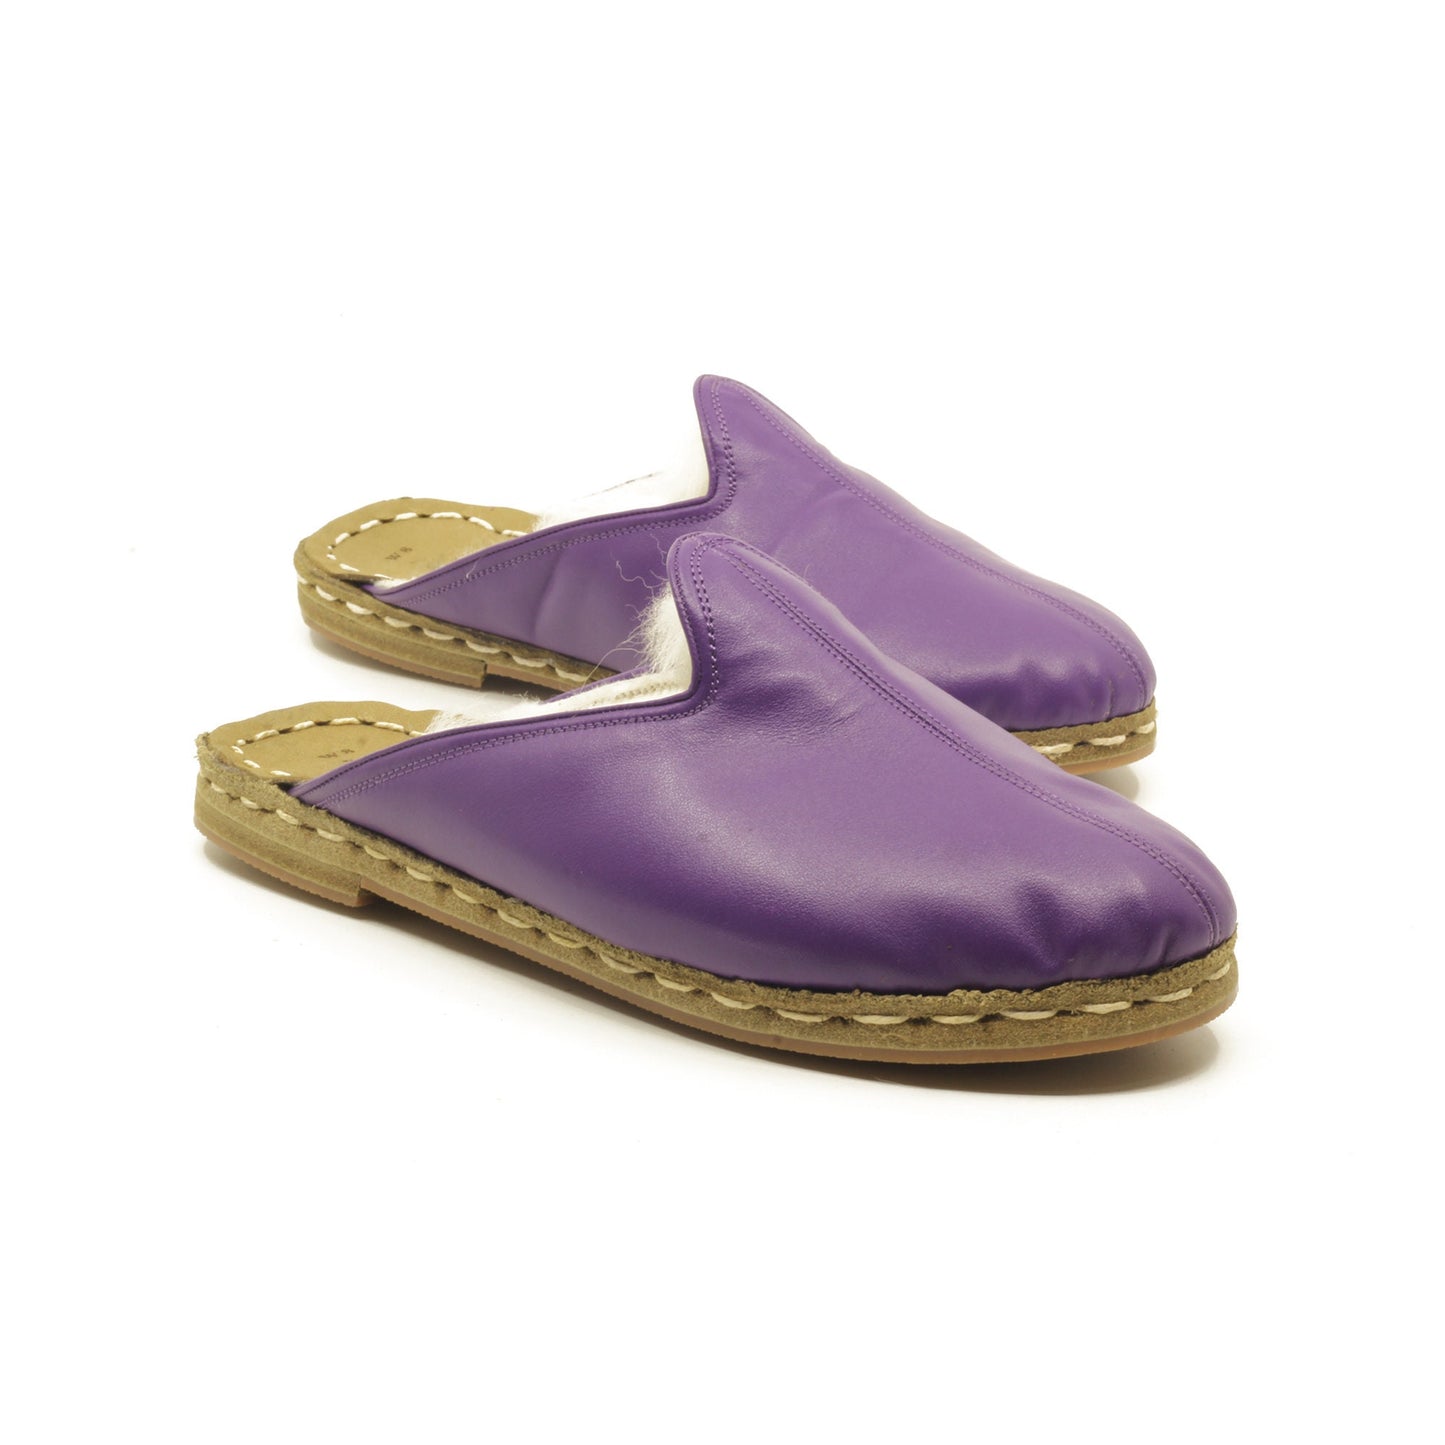 Winter Slippers  - Sheepskin slippers  - Close Toed Slippers - Purple Leather – Rubber Sole - For Women